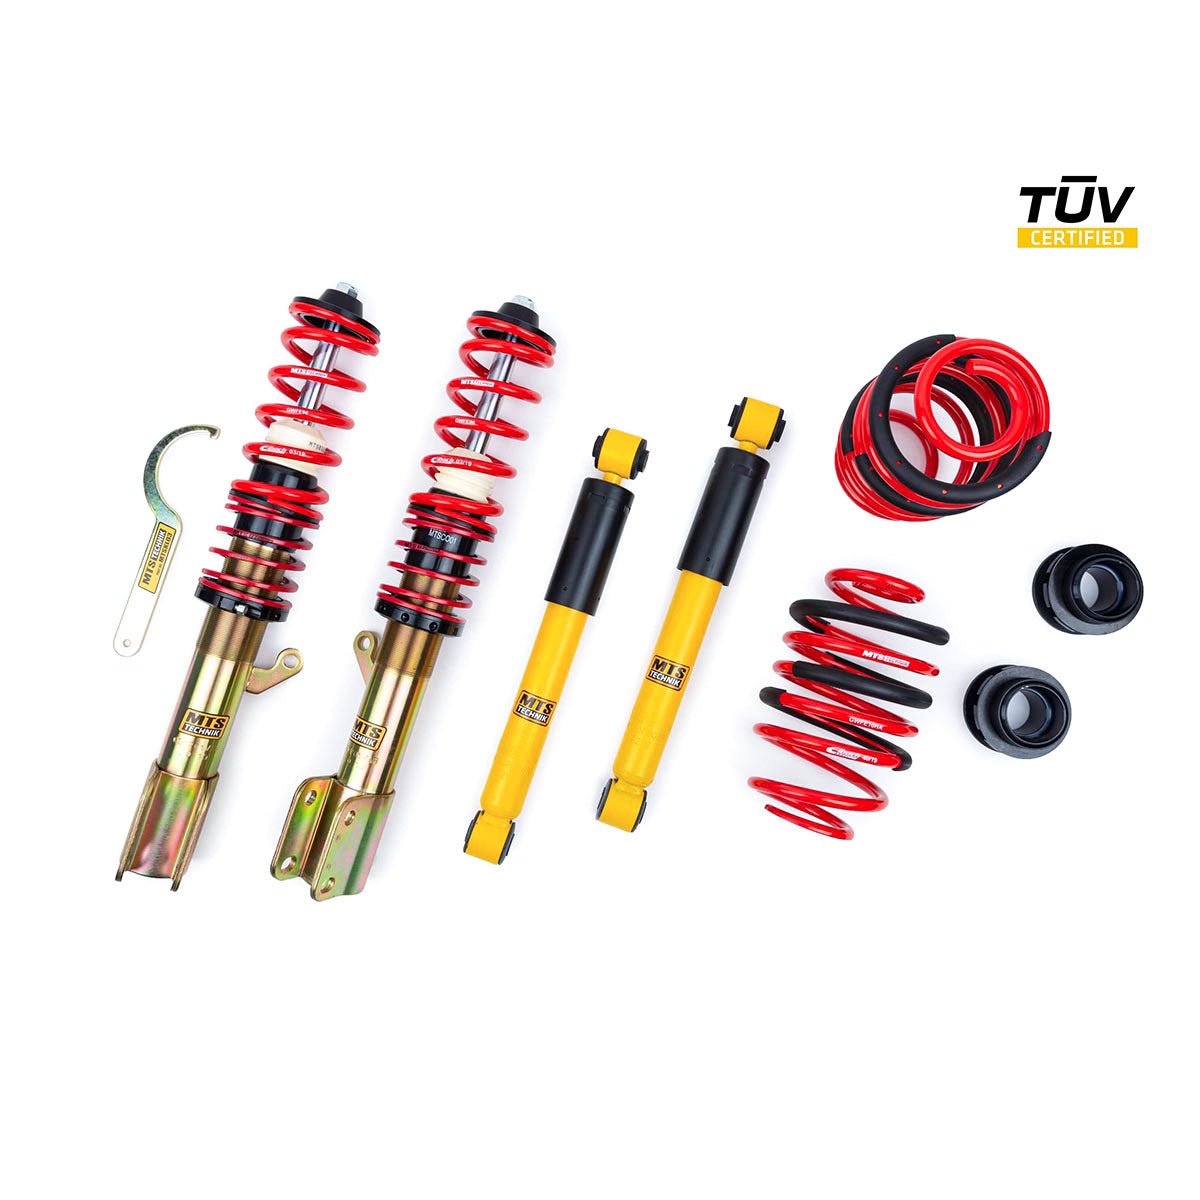 MTS TECHNIK coilover kit STREET Opel Astra G station wagon (with TÜV) - PARTS33 GmbH